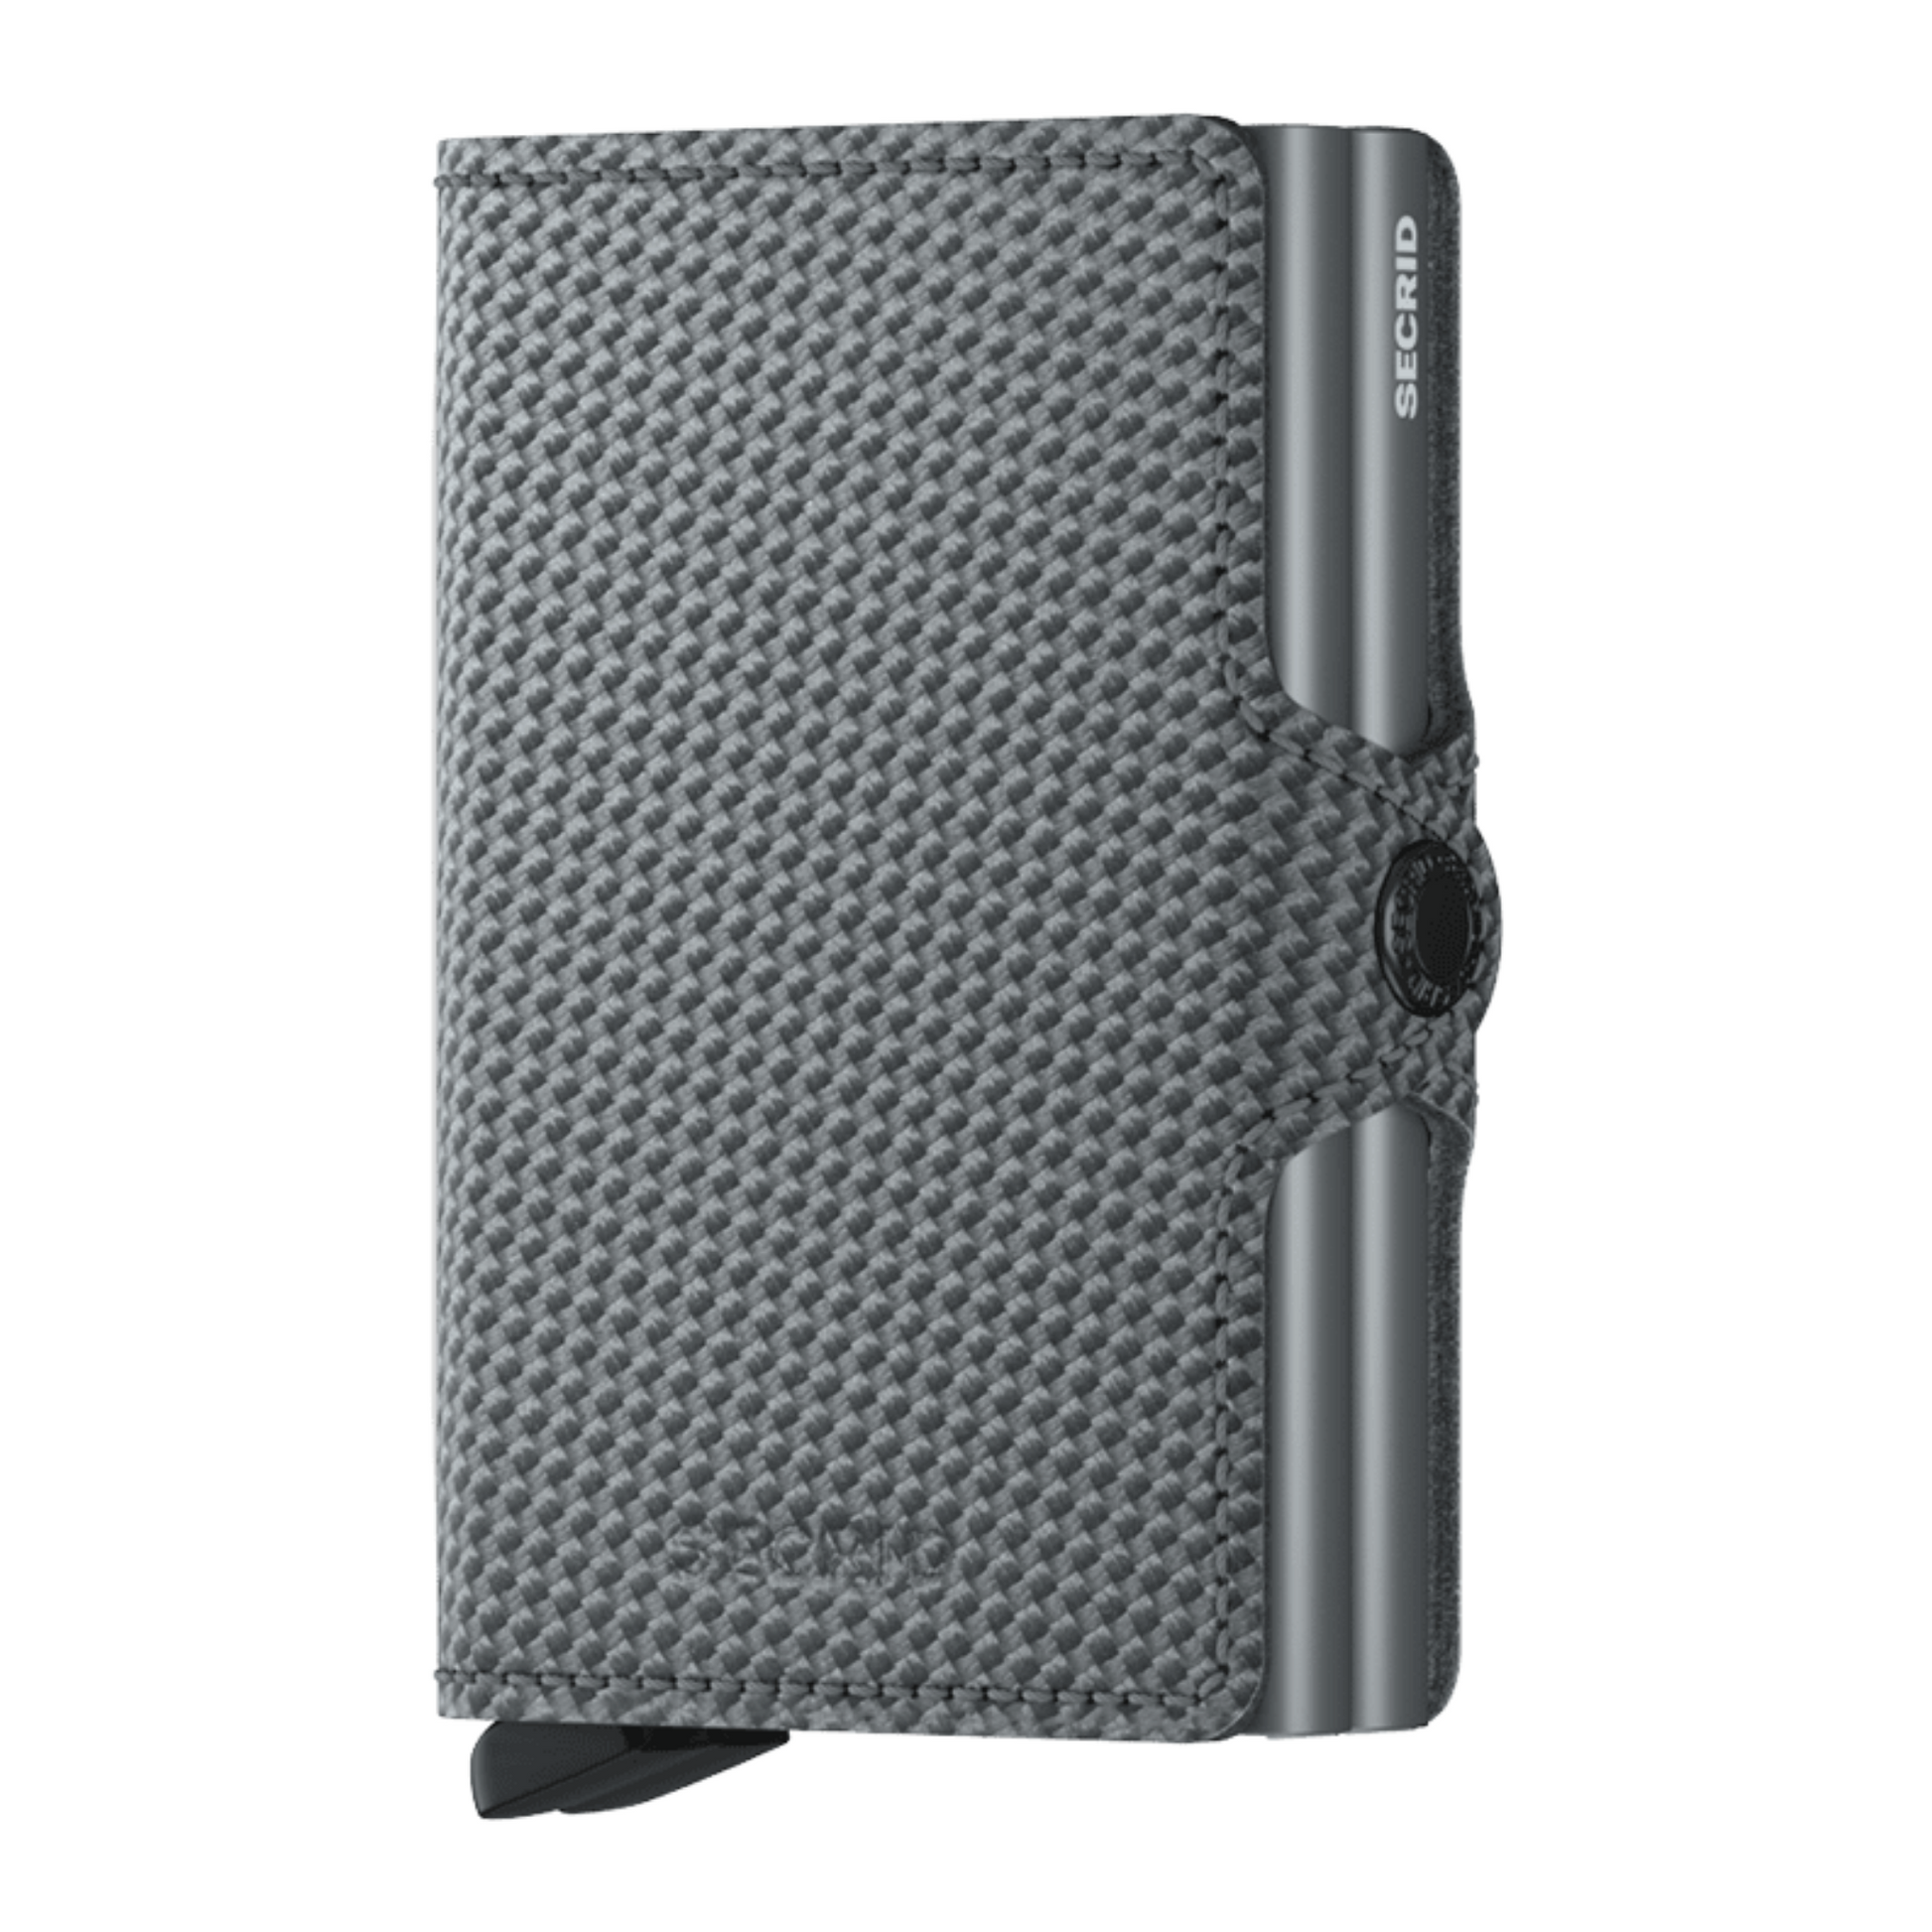 A geometric patterned carbon fibre grey wallet features two inner metallic grey cardholders.